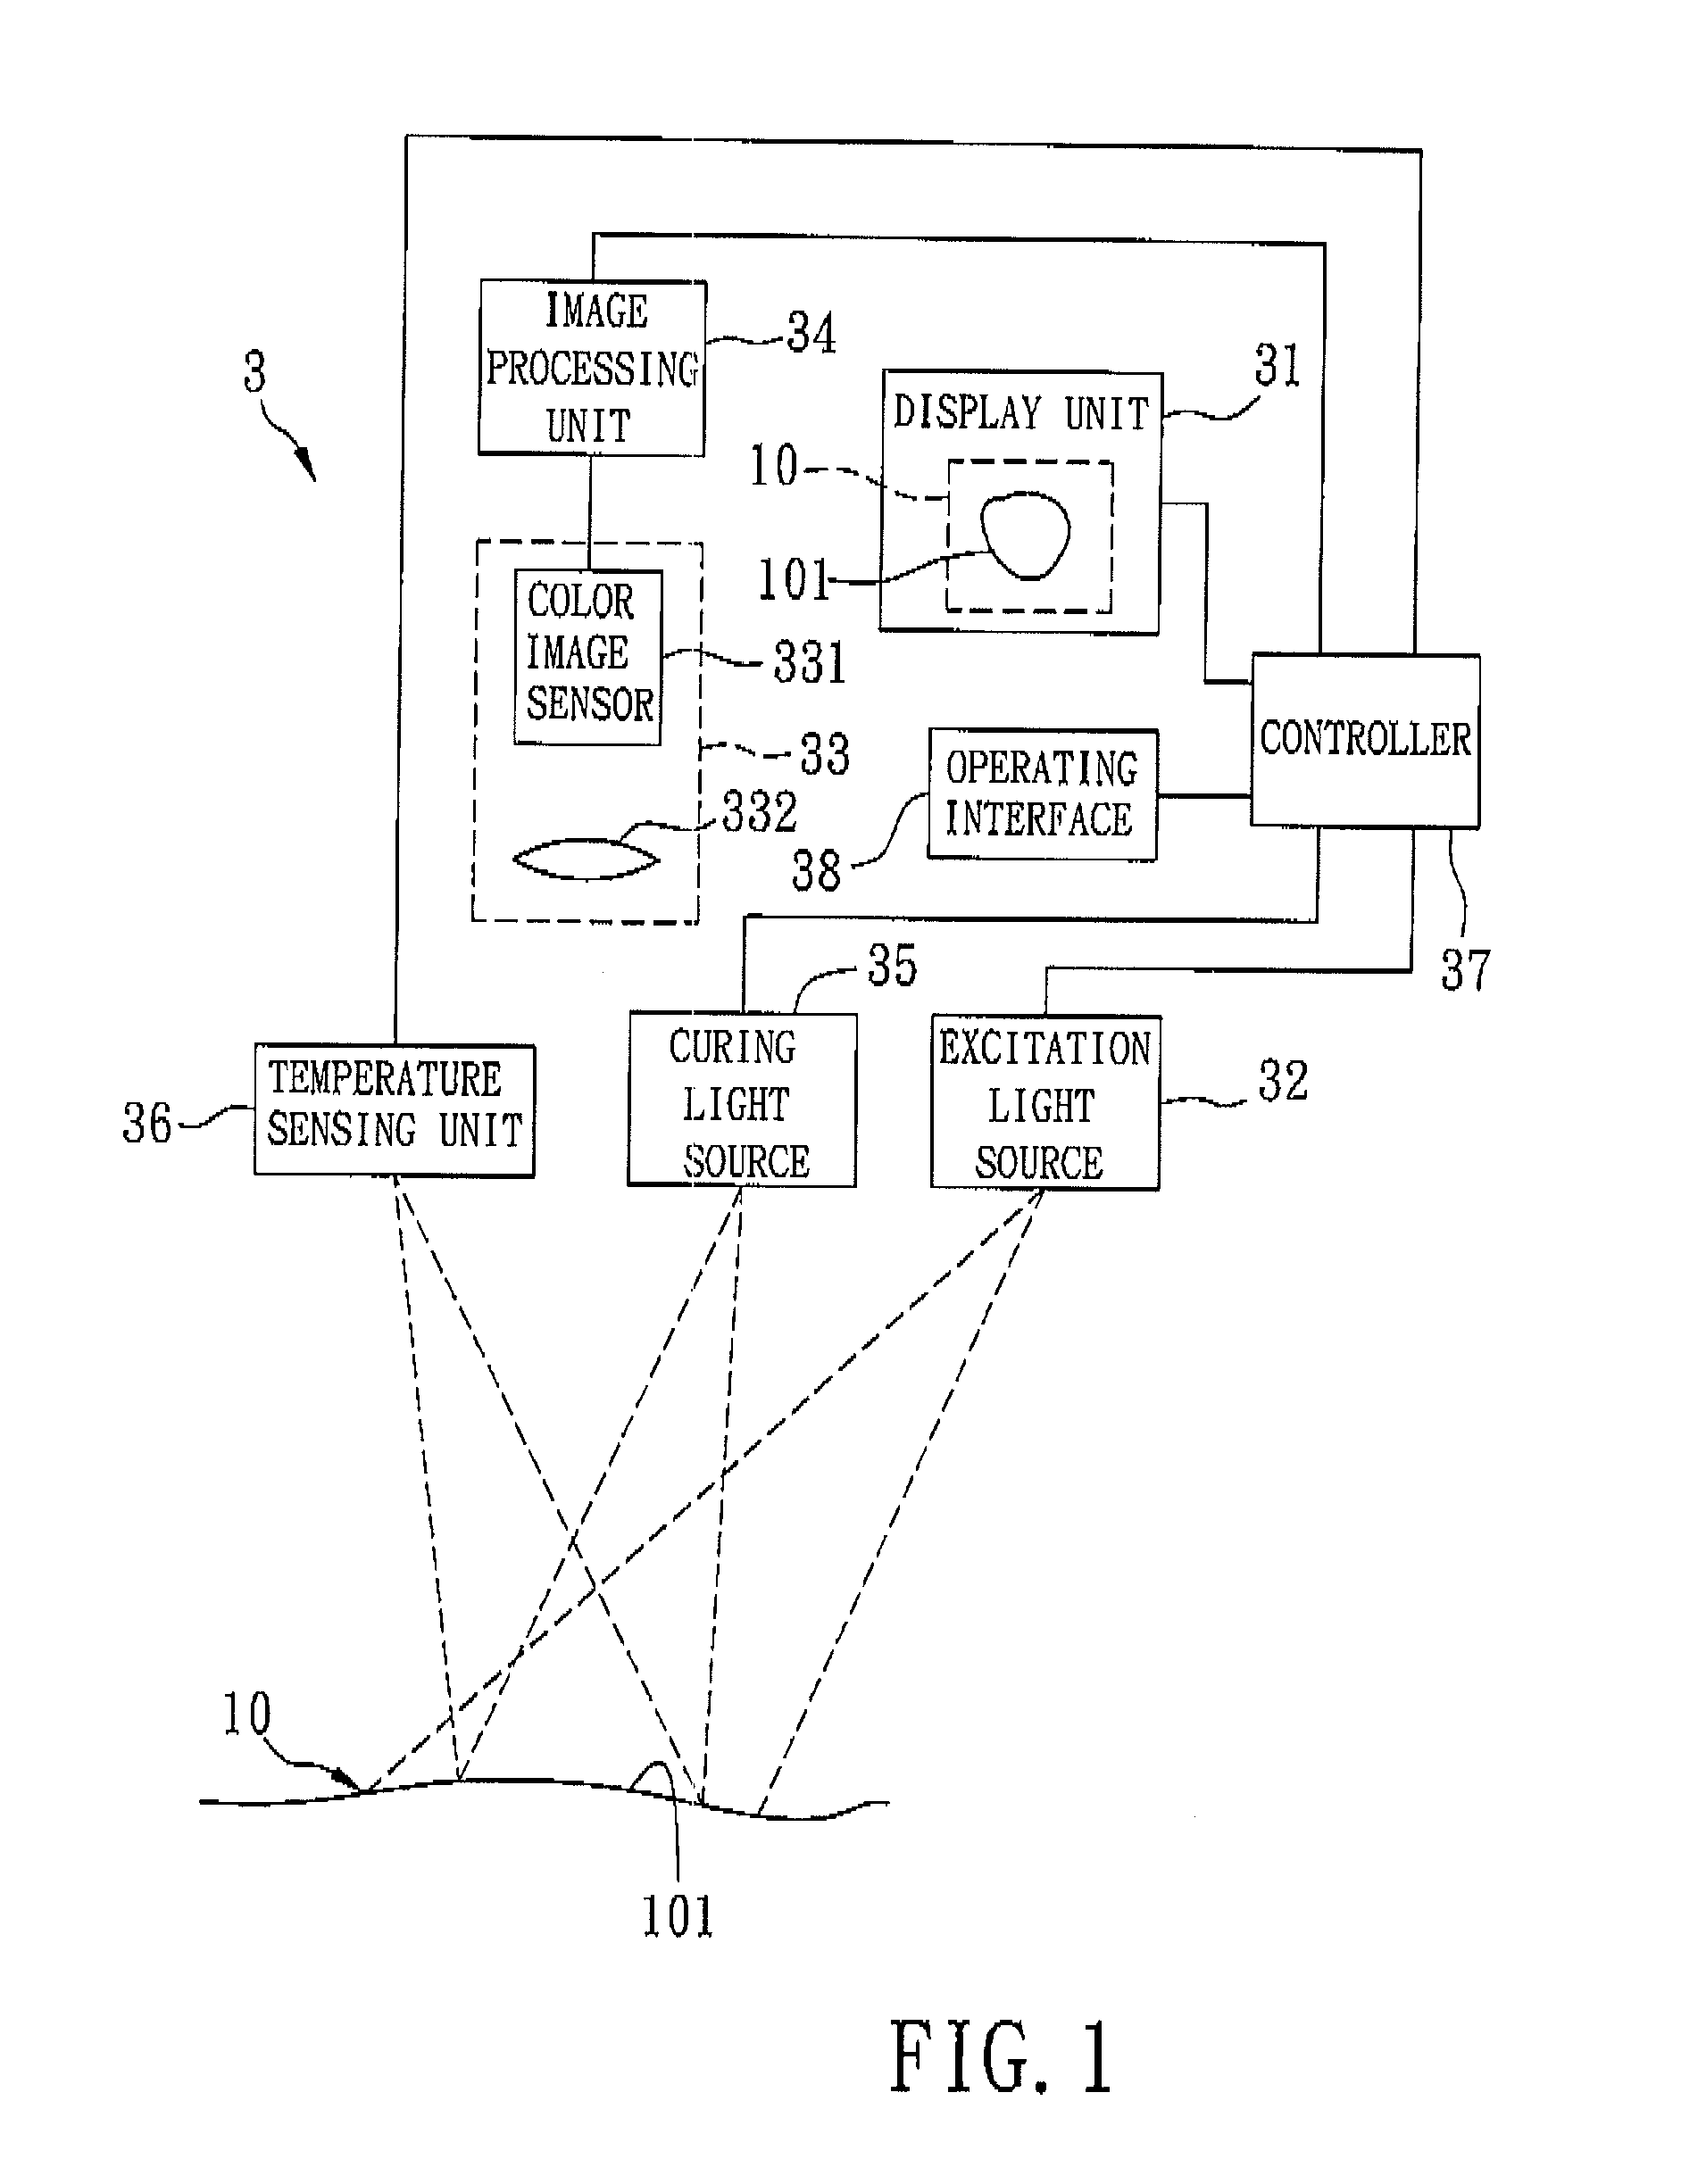 Apparatus and method for performing photodynamic diagnosis and photodynamic therapy